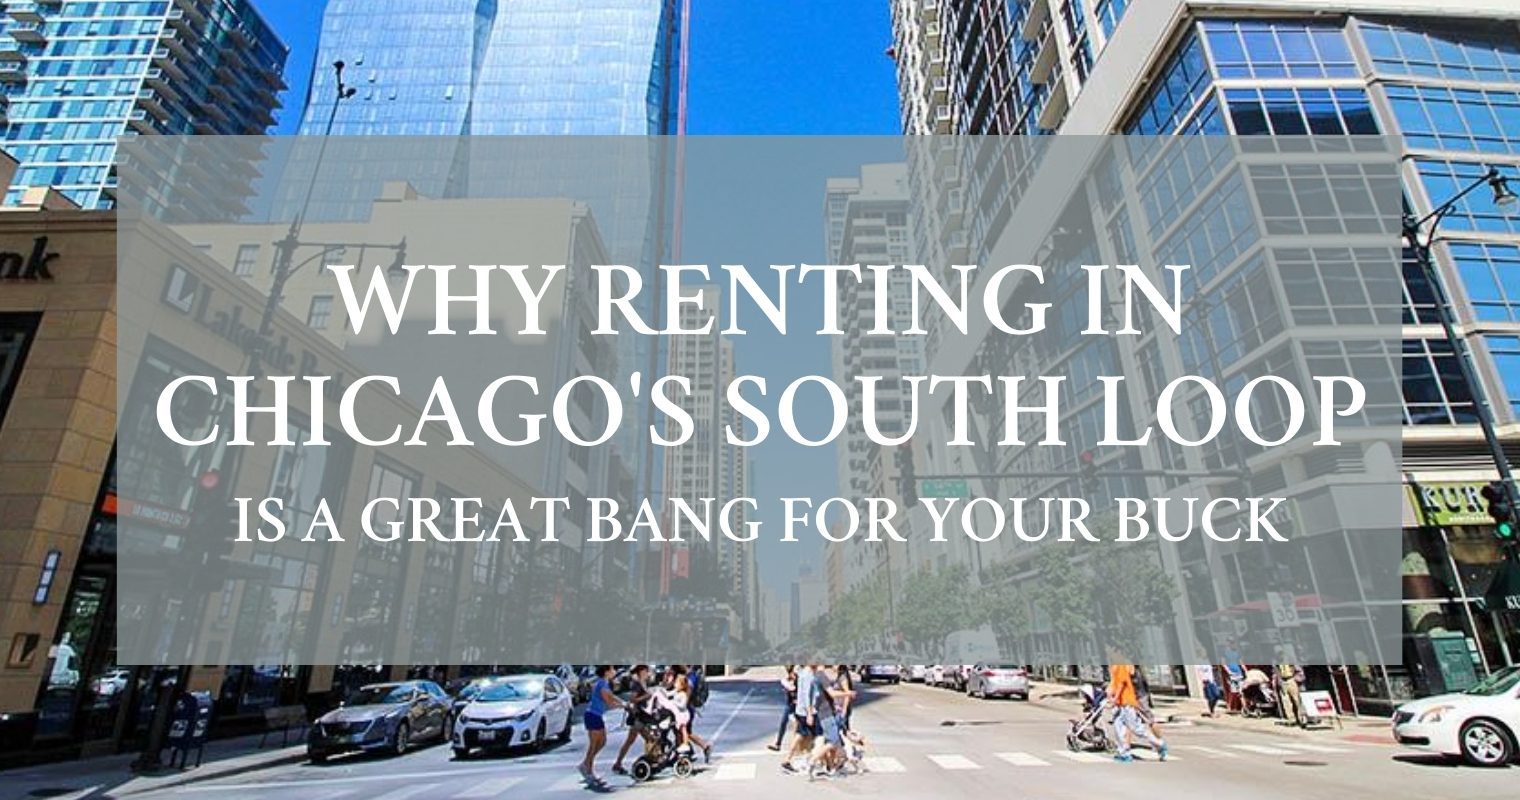 Why renting in Chicago's South Loop is a great bang for your buck